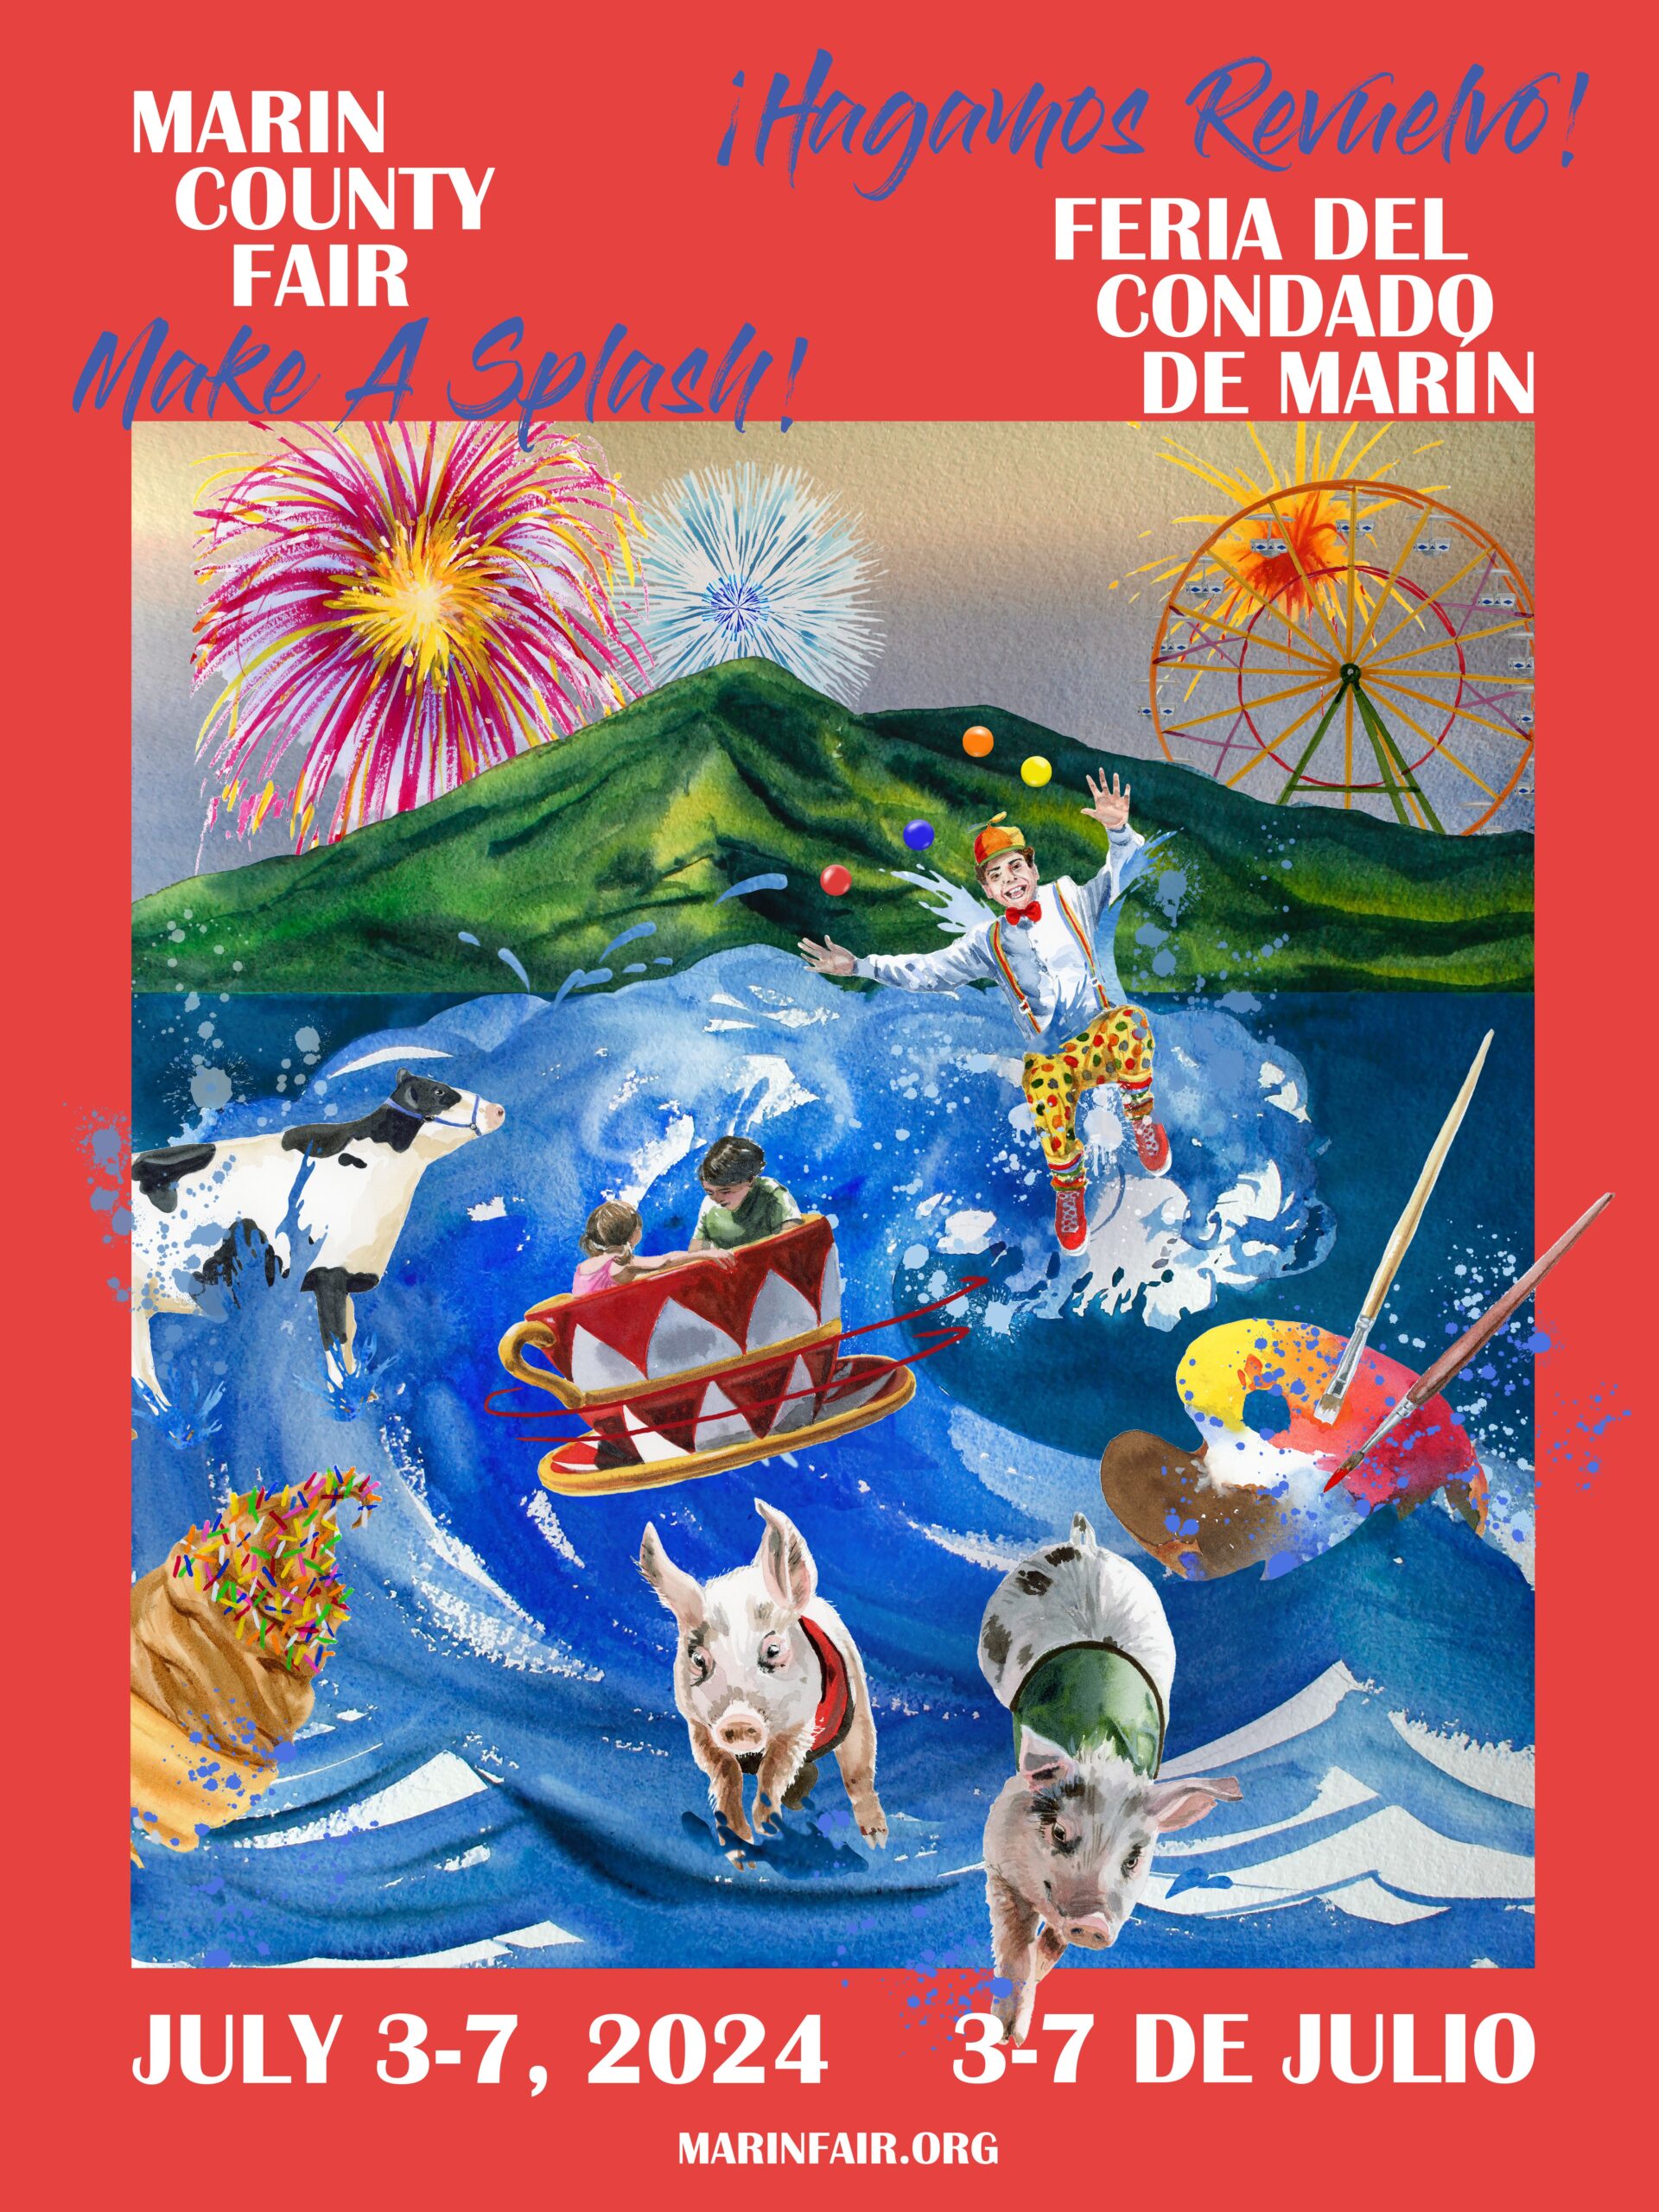 2024 Marin County Poster: Make a splash July 3-7, 2024 marinfair.org Feria Del Condado De Marin Hagamos Revielvo! 3-7 De Julio Poster in one a red background. With rides in the background at the top. With the ocean in the foreground with a juggler, a cow, 2 pigs